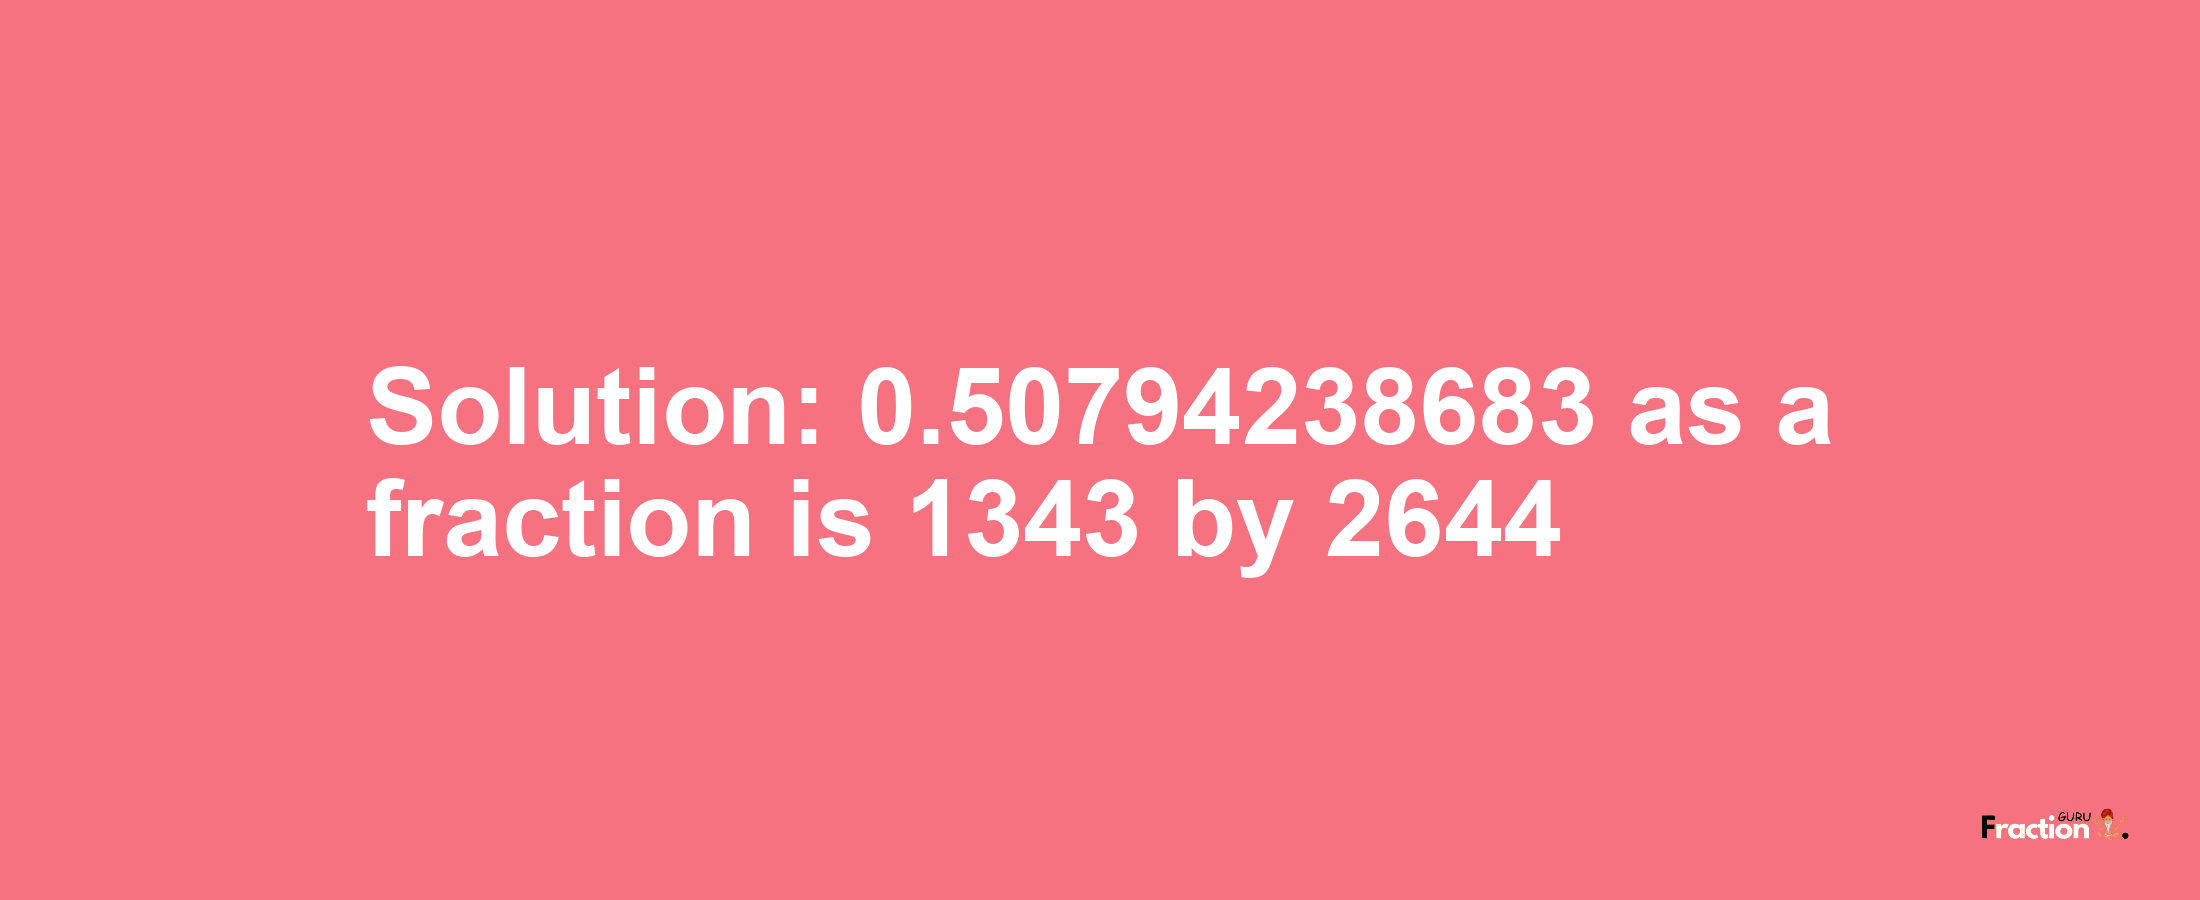 Solution:0.50794238683 as a fraction is 1343/2644